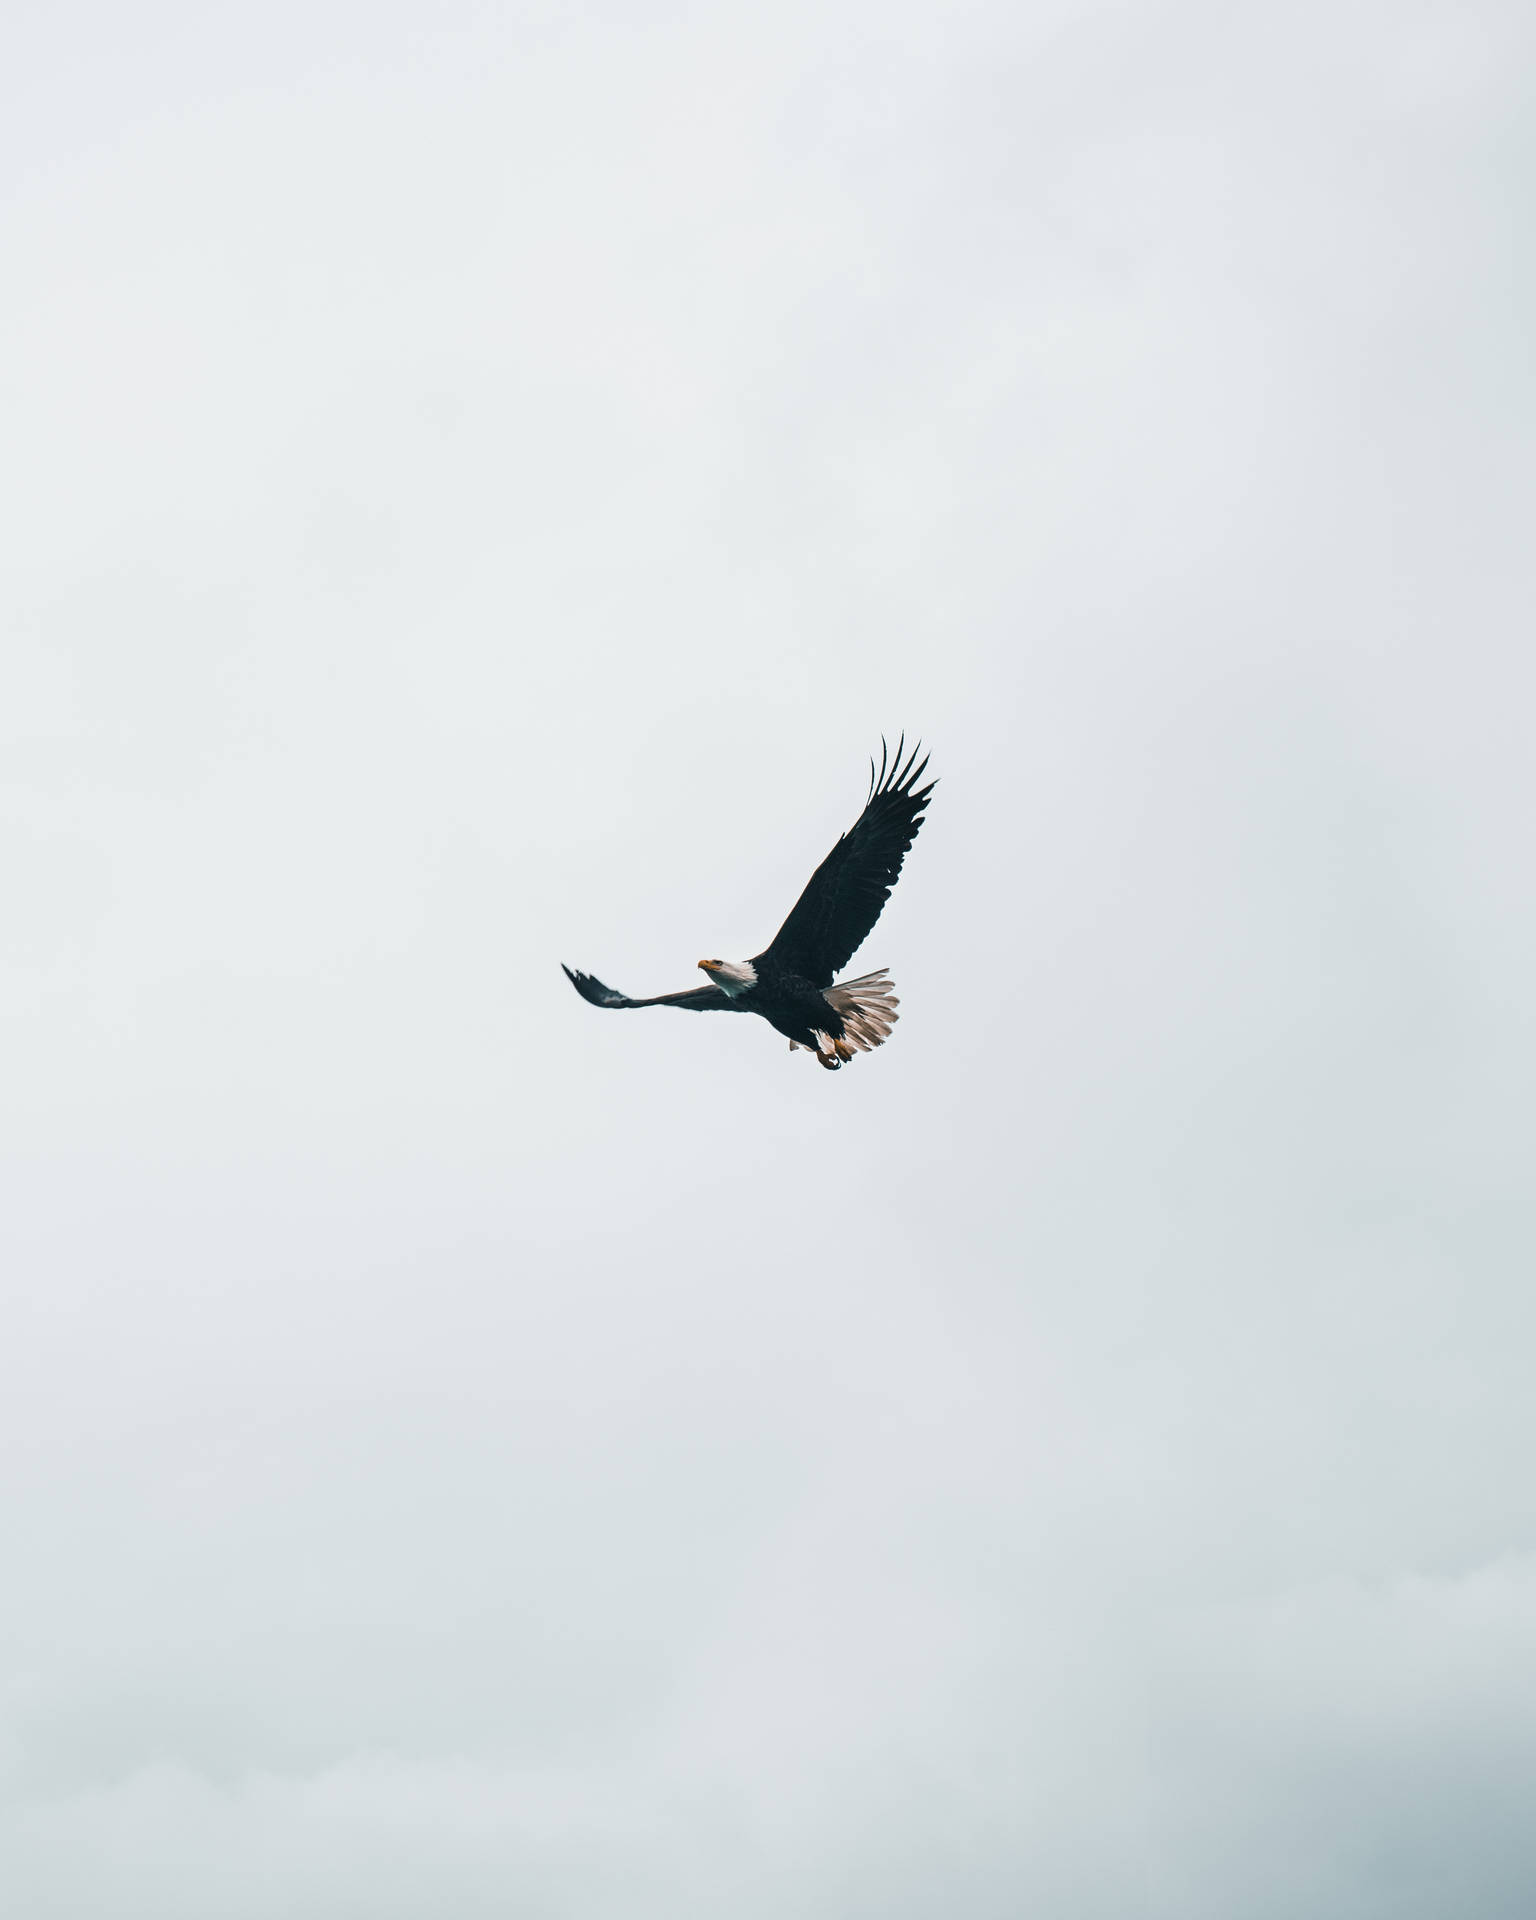 Eagles 3568X4460 Wallpaper and Background Image